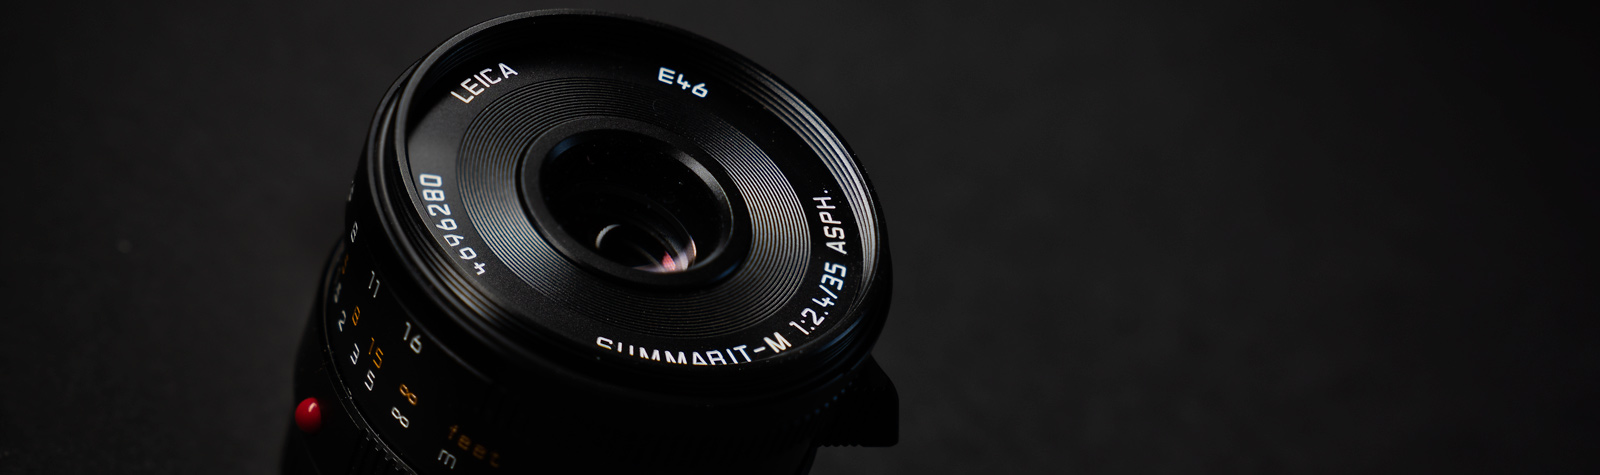 Leica Summarit 35mm f/2.4 ASPH review – Leica Lenses for Normal People